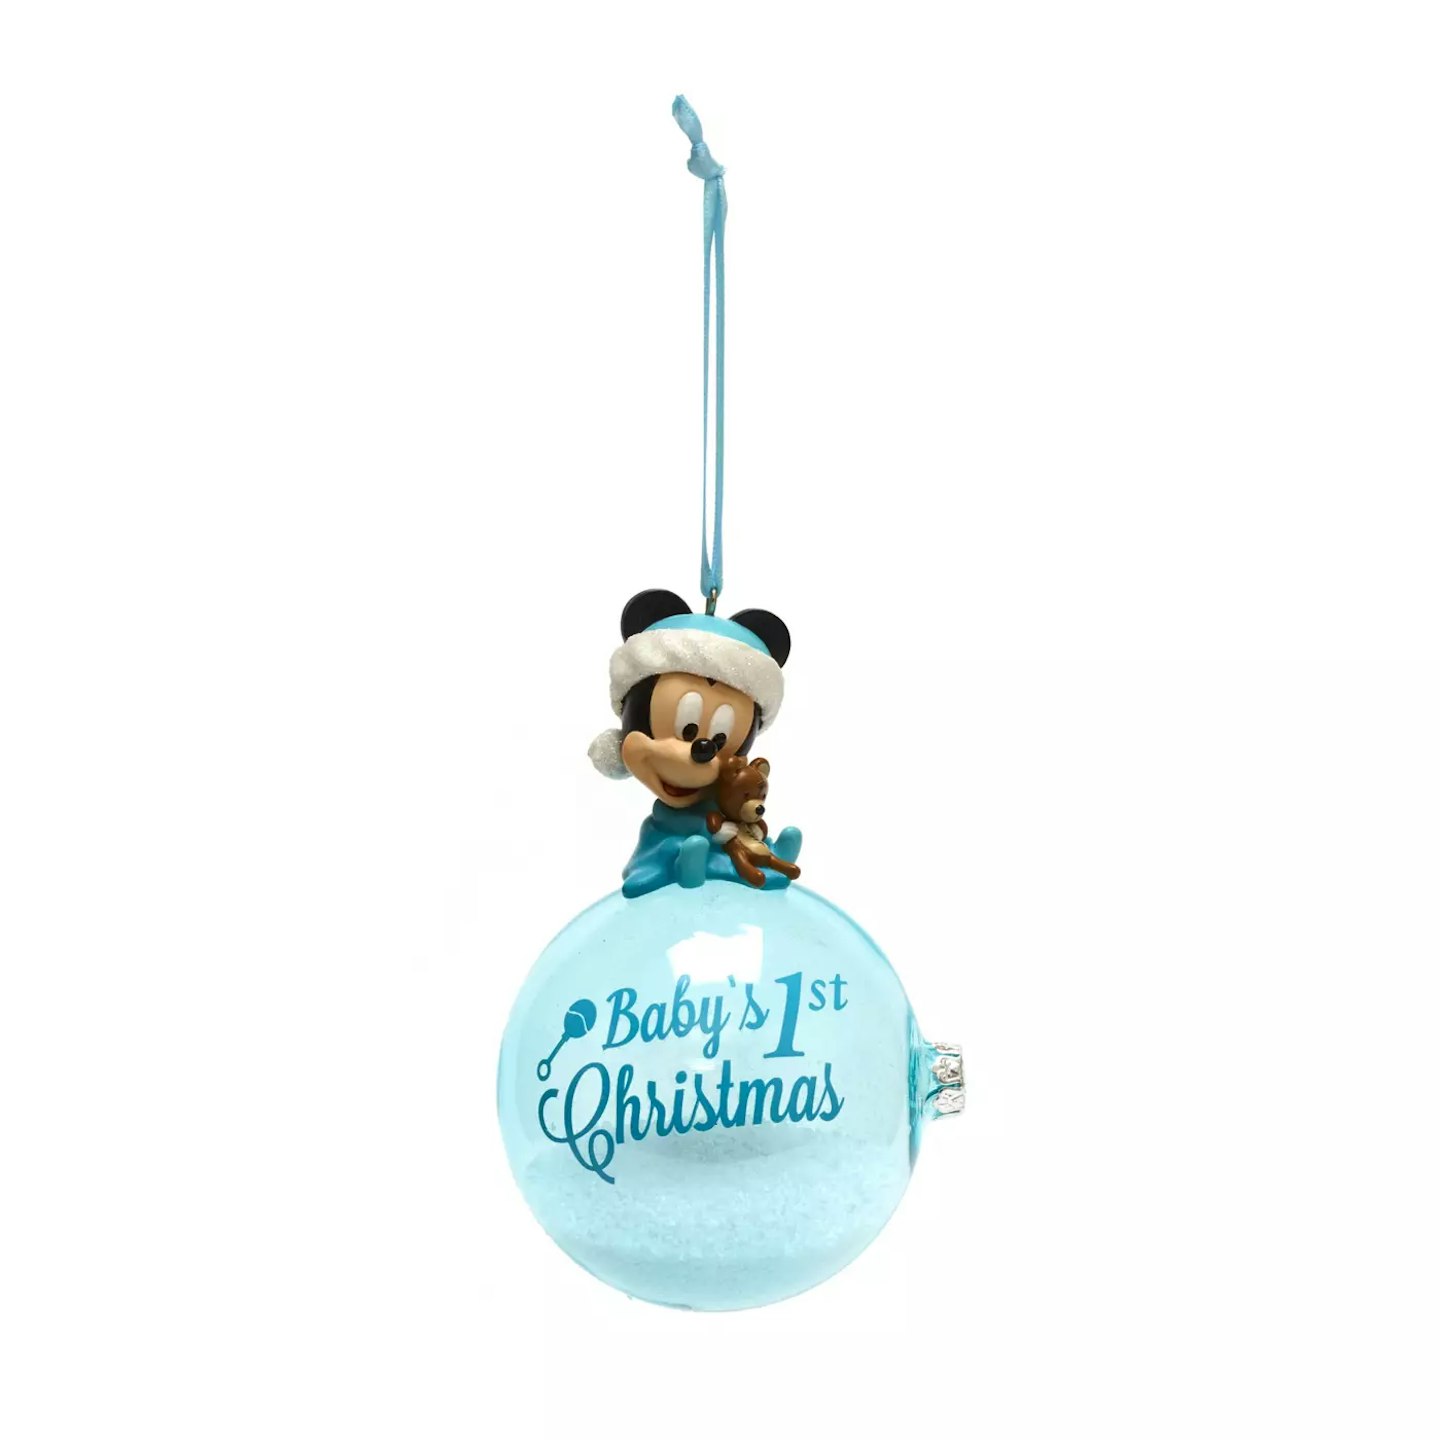 Disney bauble - First Christmas bauble